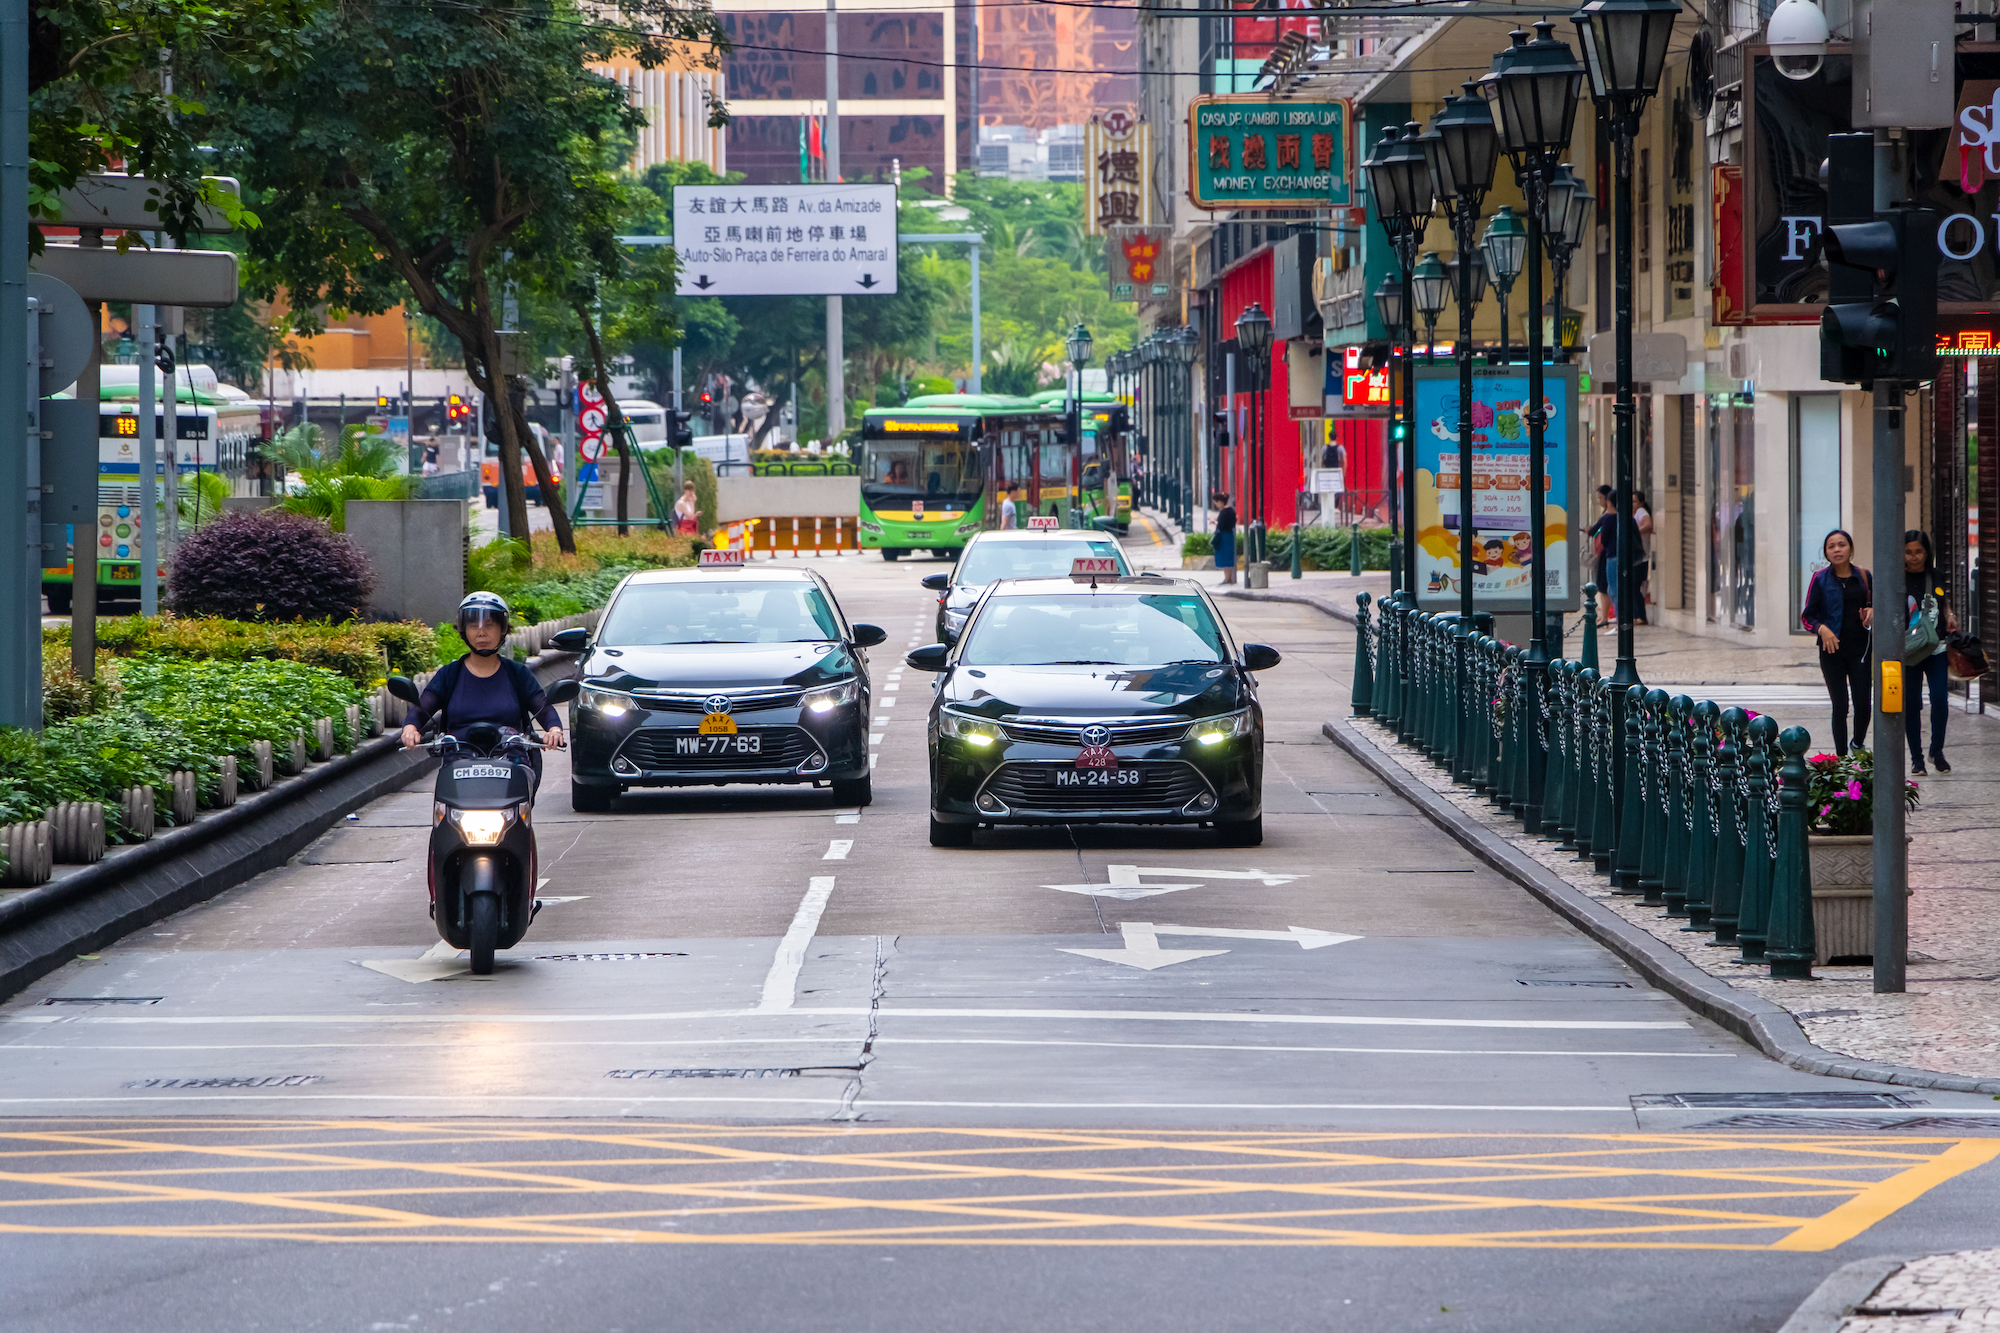 The Macau Taxi ride-hailing app could return as early as next month